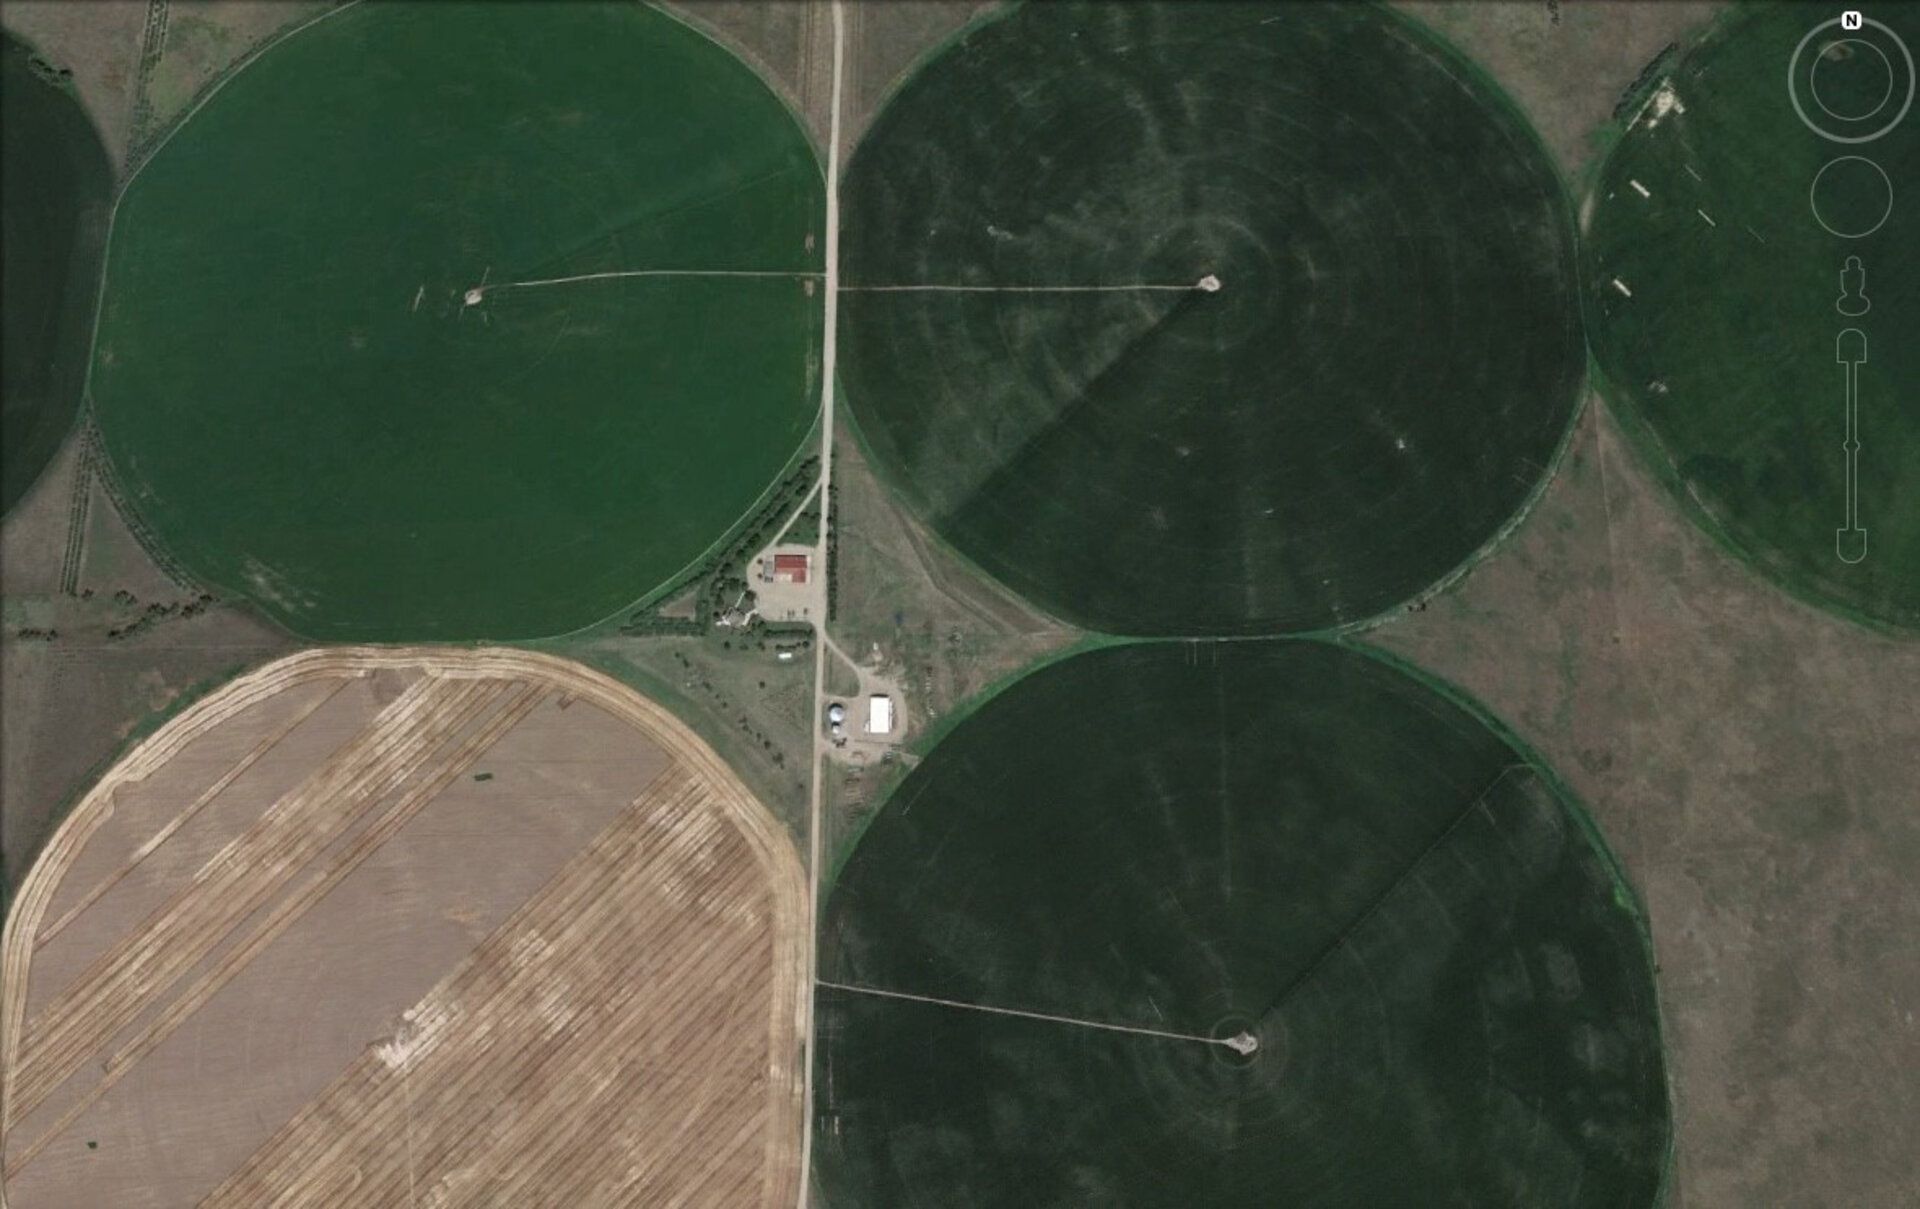 Circular fields as seen from space